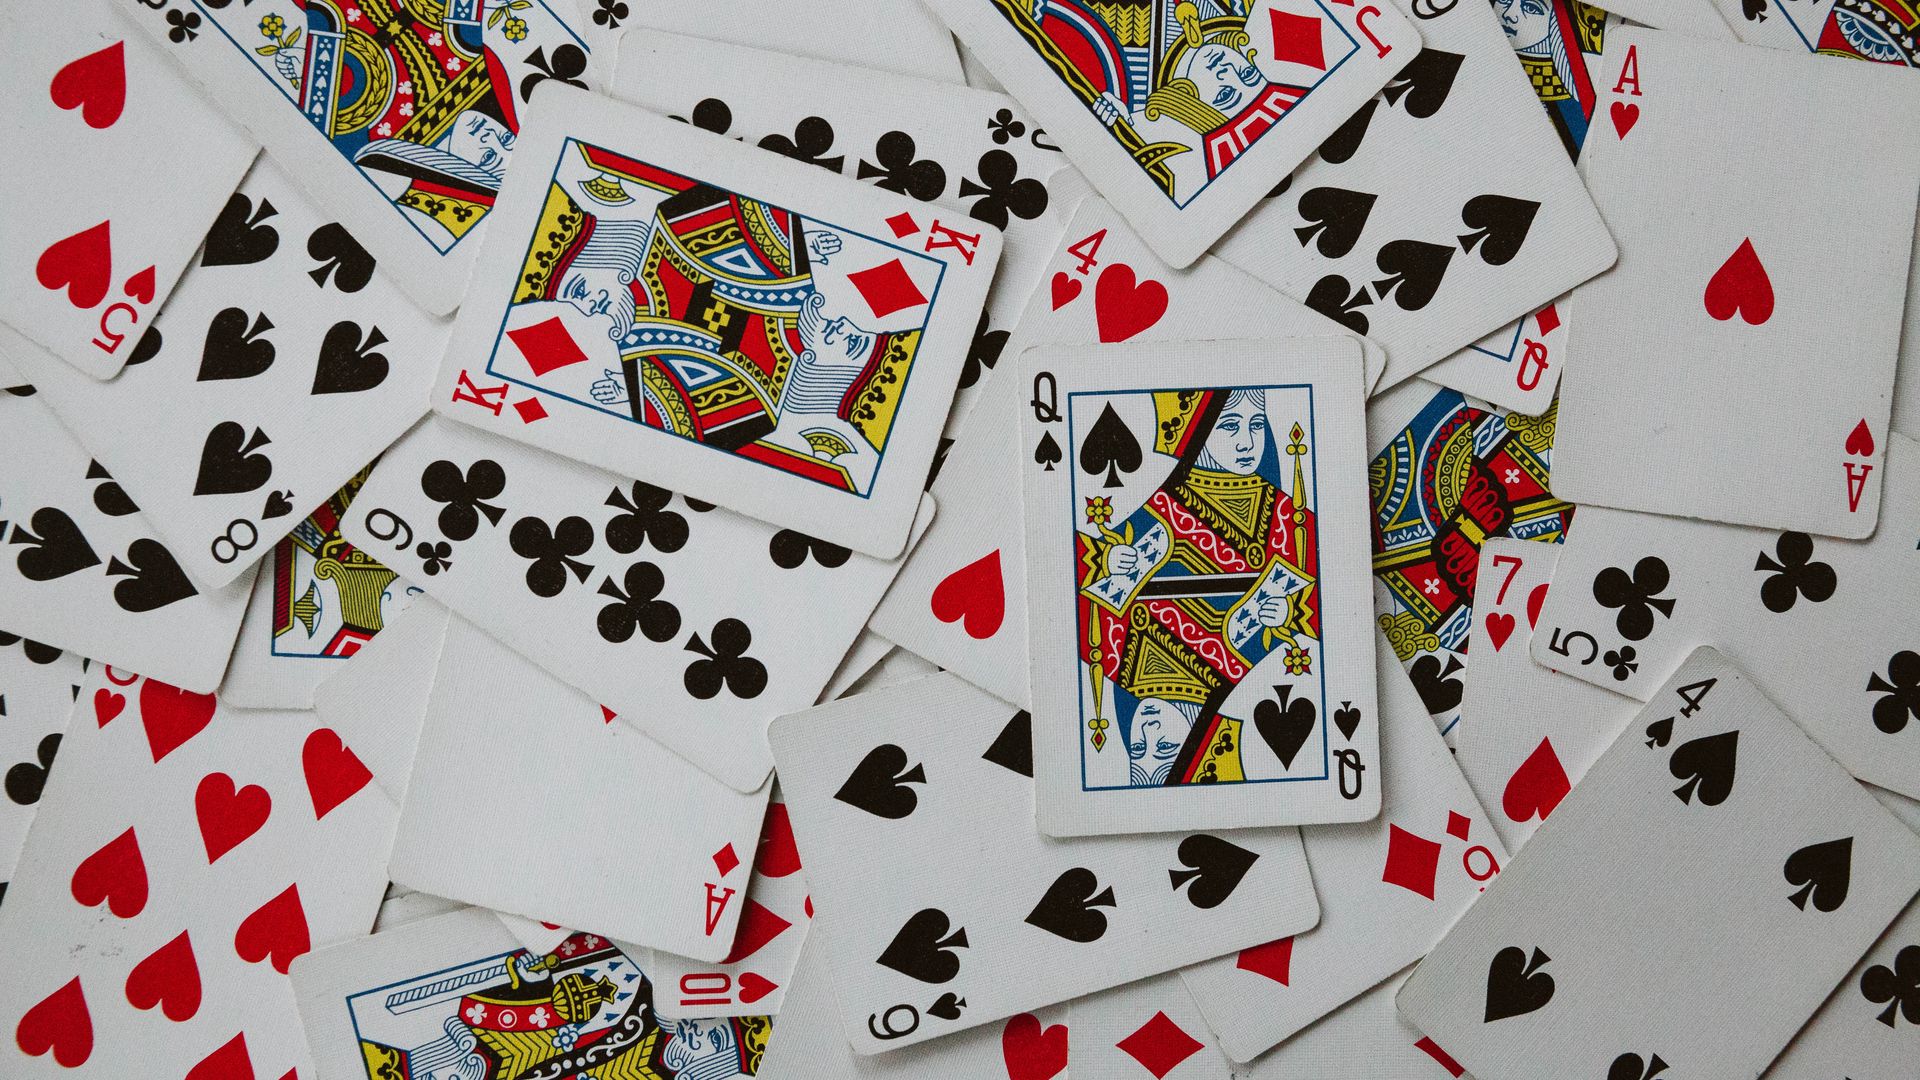 Download wallpaper 1920x1080 playing cards, cards, pattern full hd, hdtv,  fhd, 1080p hd background